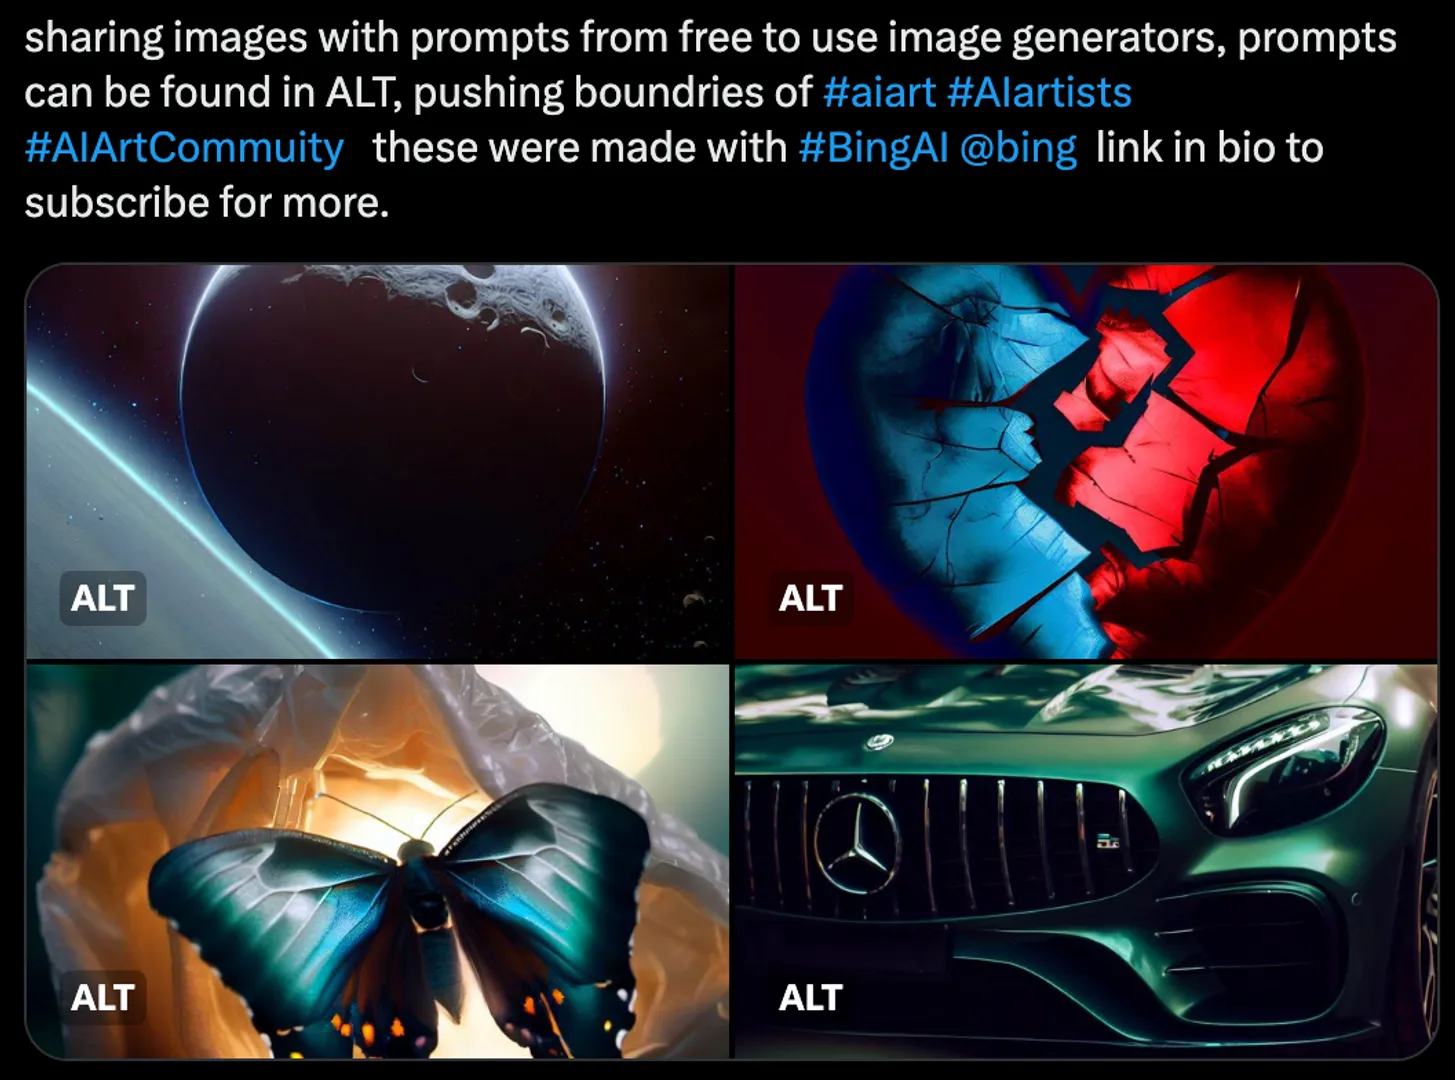 Interested in AI Generative art? come join me on the journey

https://twitter.com/CreativesXtra/status/1689098596371628032?s=20